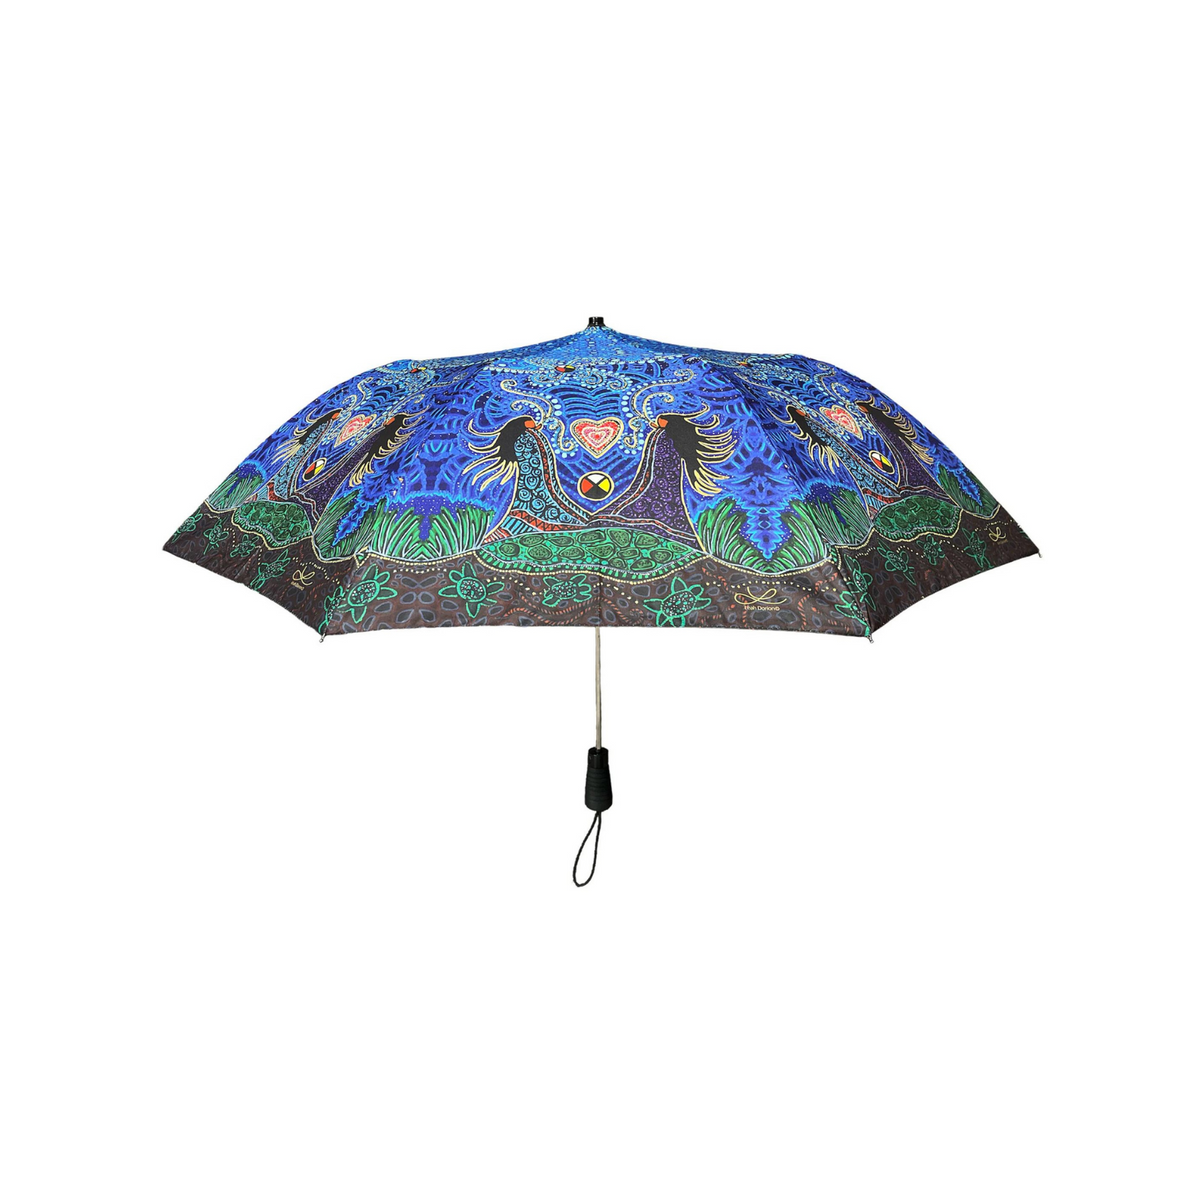 Collapsible Umbrella with Contemporary Indigenous Design